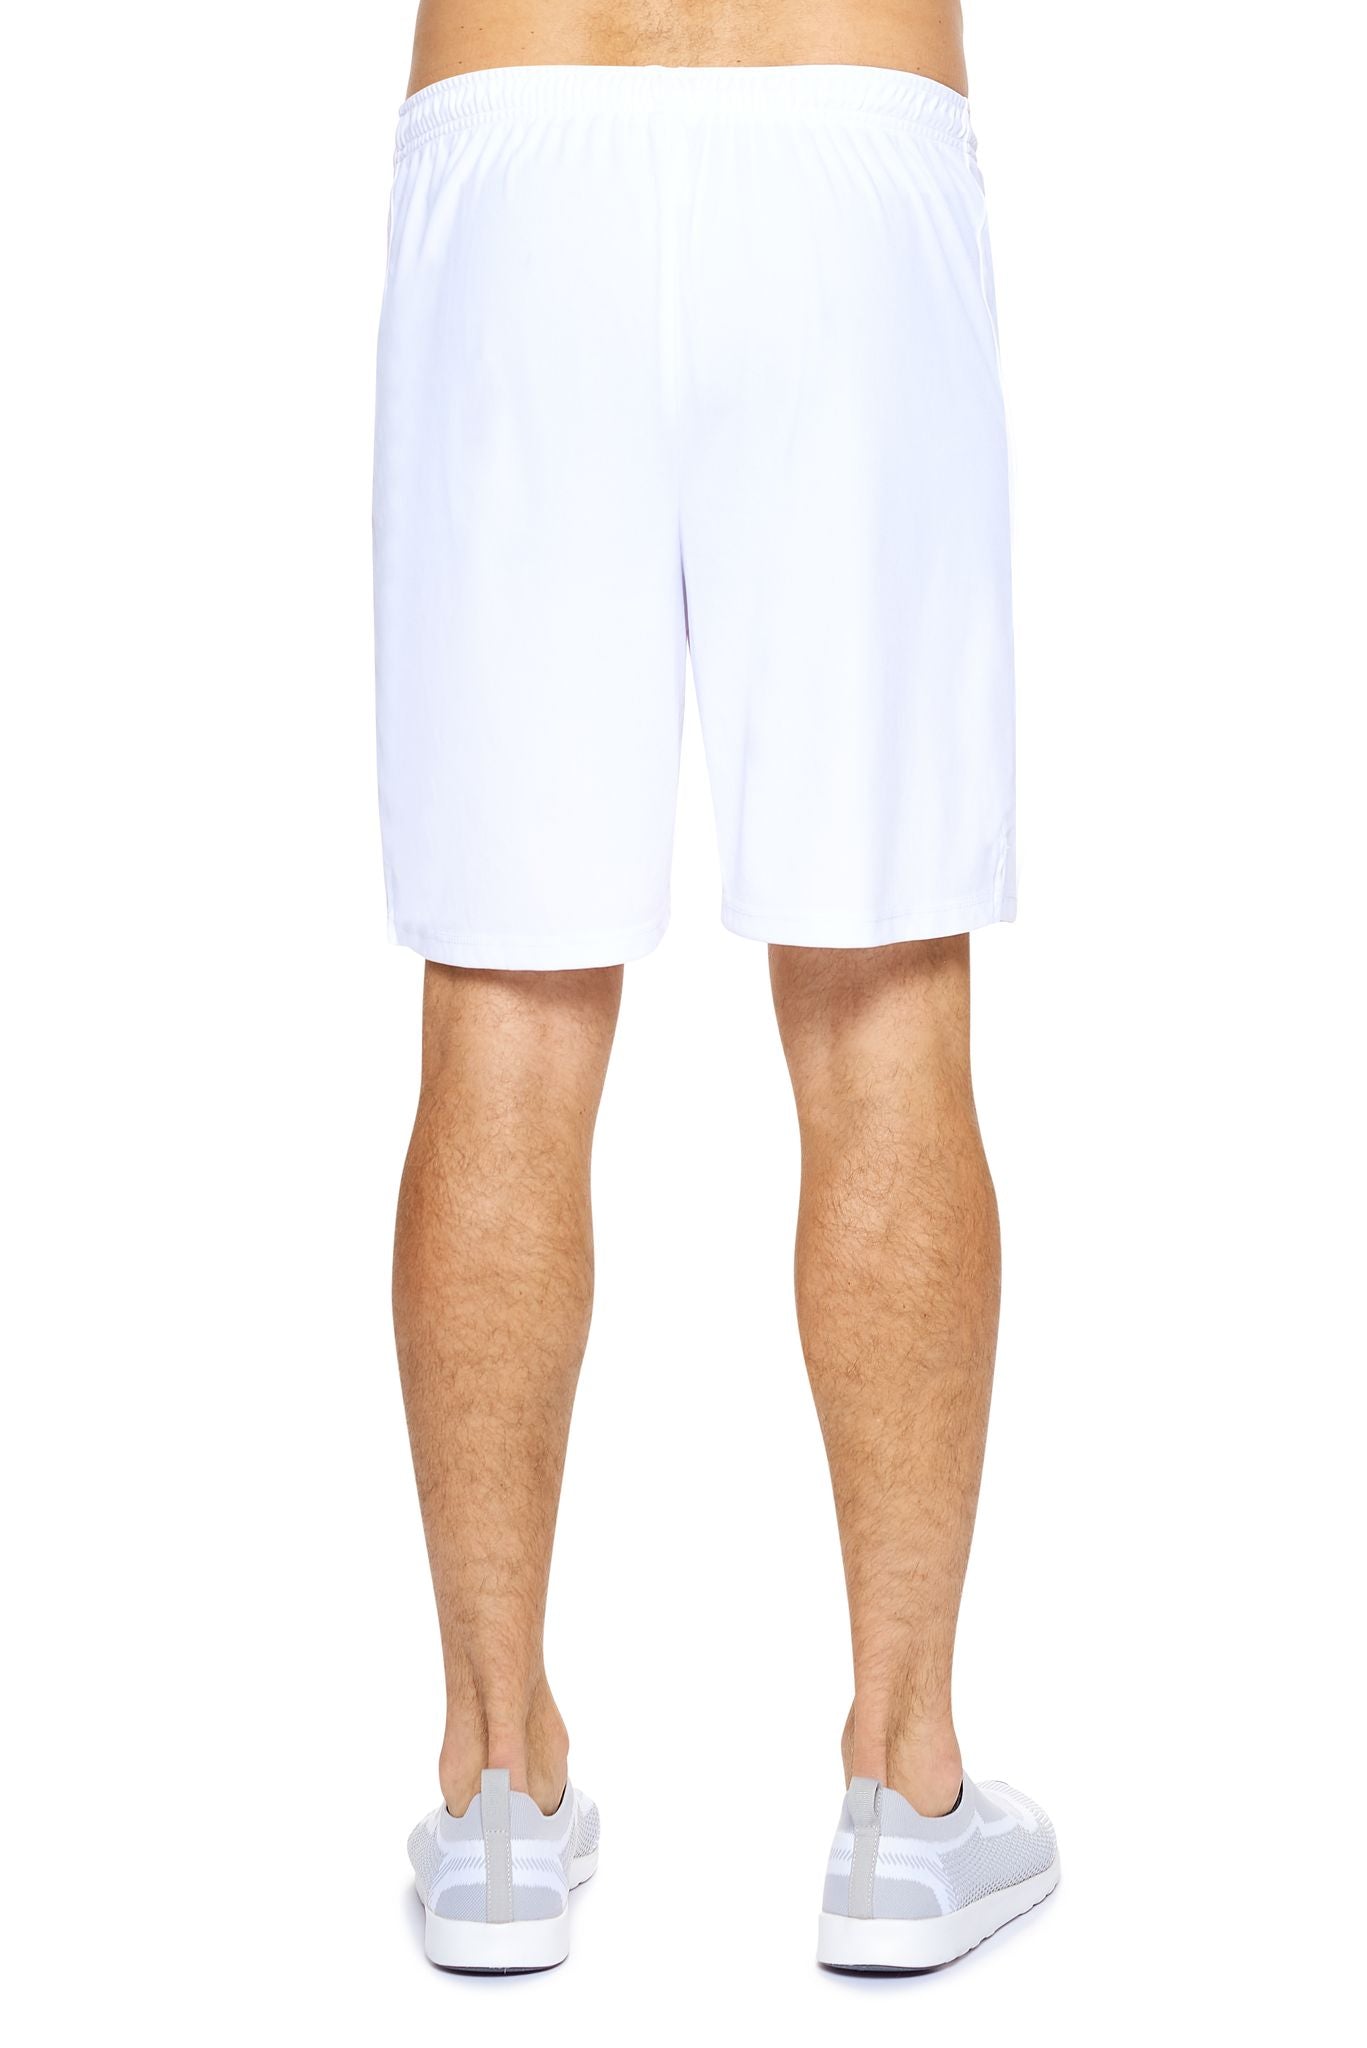 DriMax™ Impact Shorts 🇺🇸 - Expert Brand Apparel#color_white